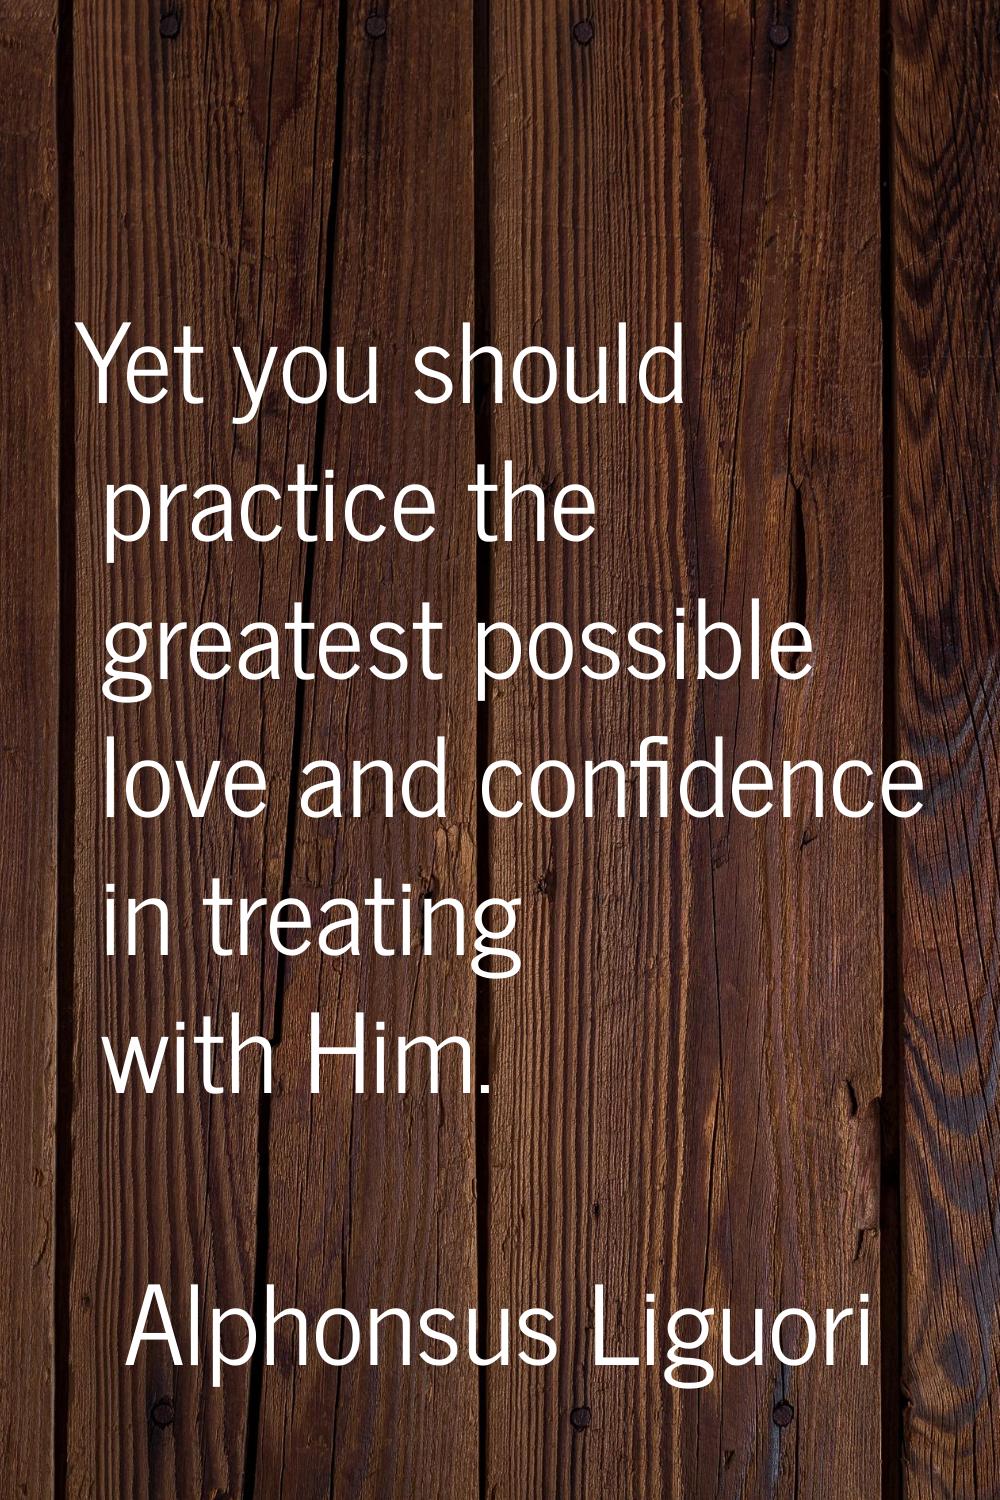 Yet you should practice the greatest possible love and confidence in treating with Him.